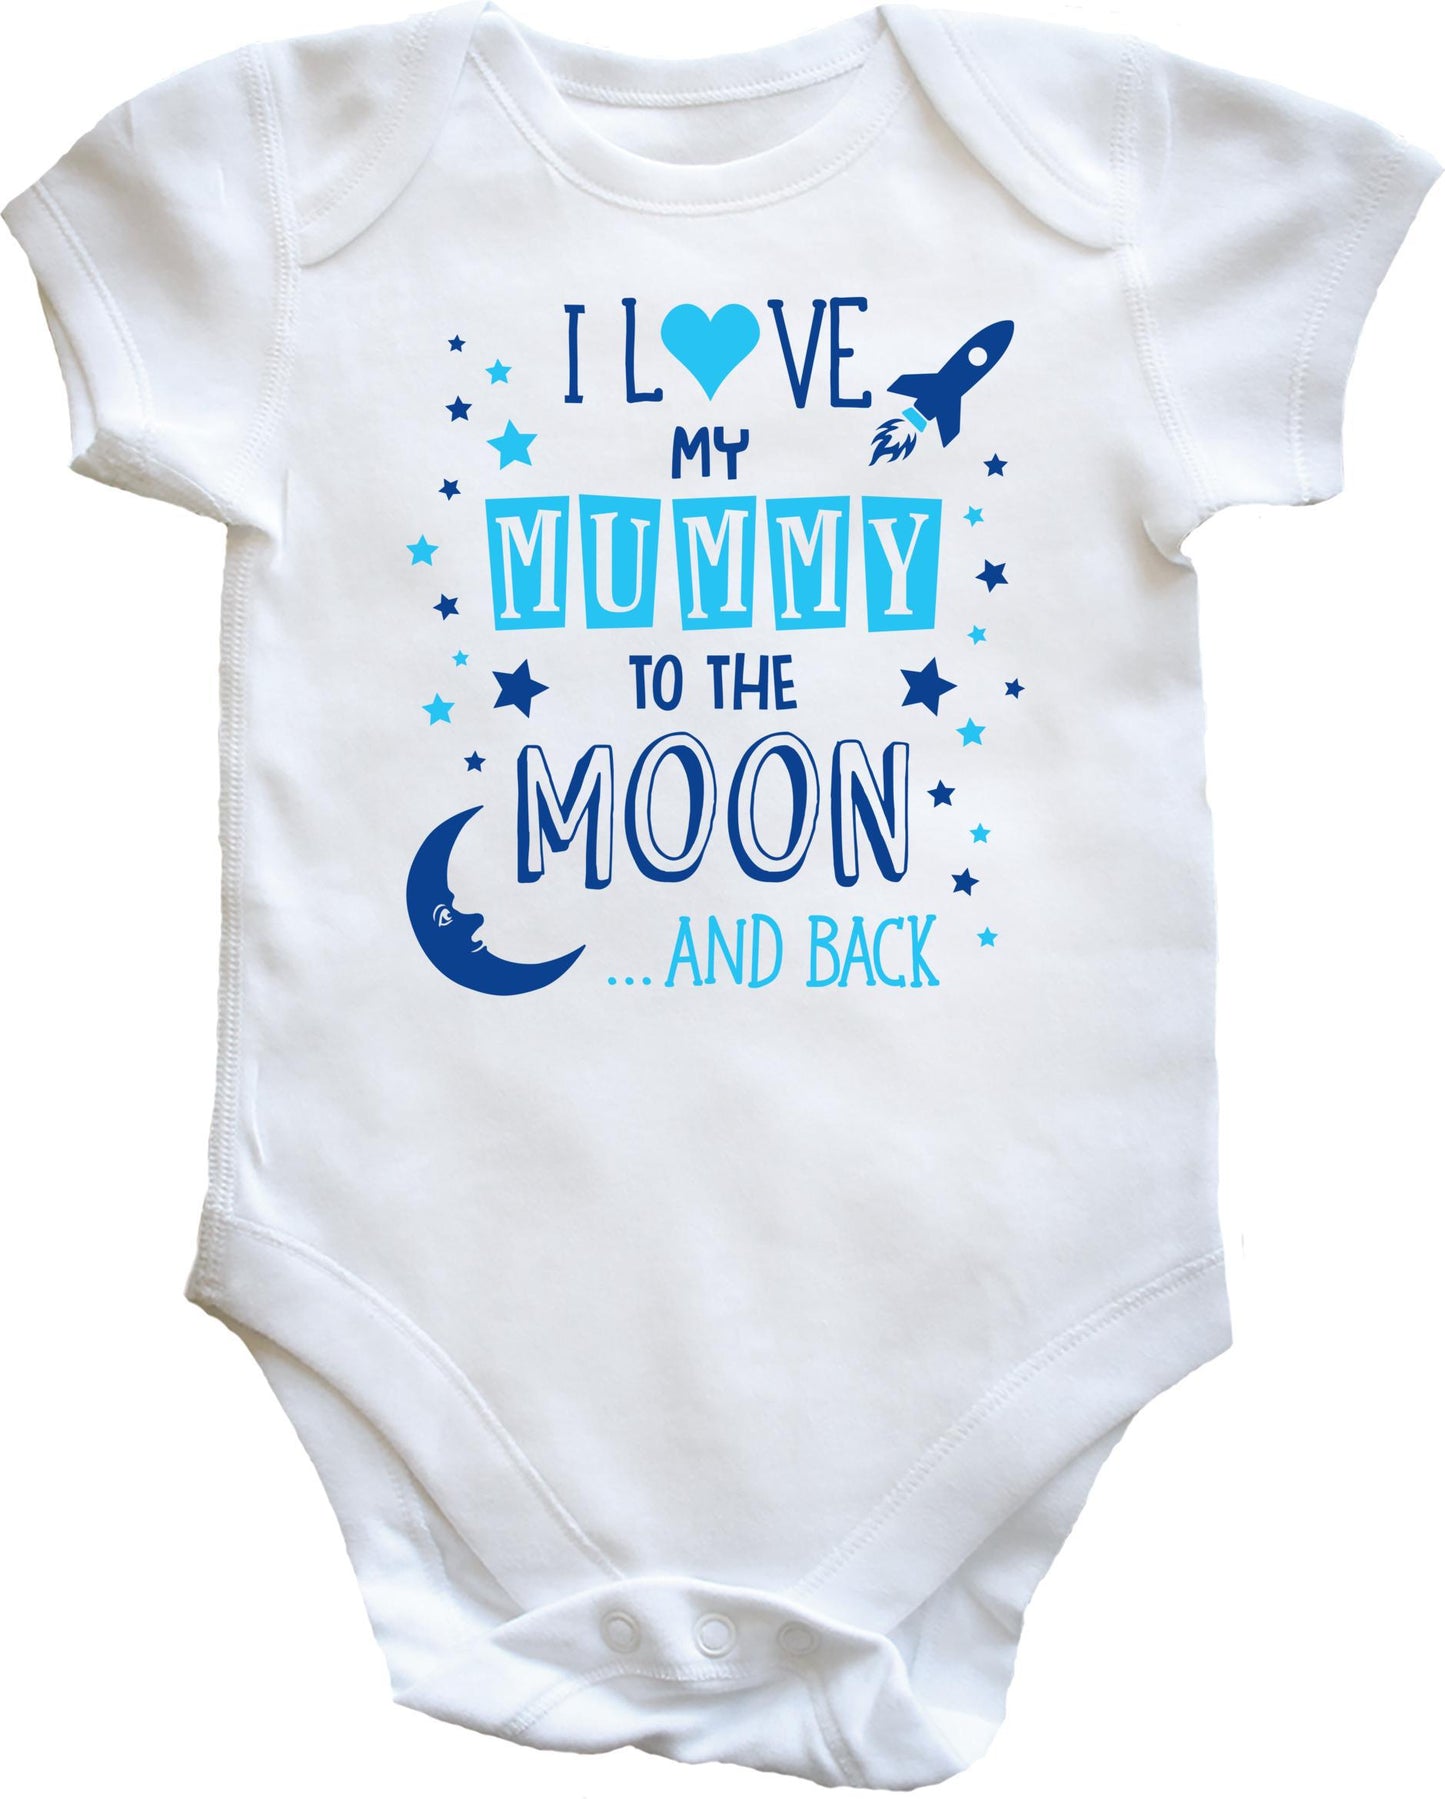 I Love My Mummy to the Moon and Back (Blue) baby vest